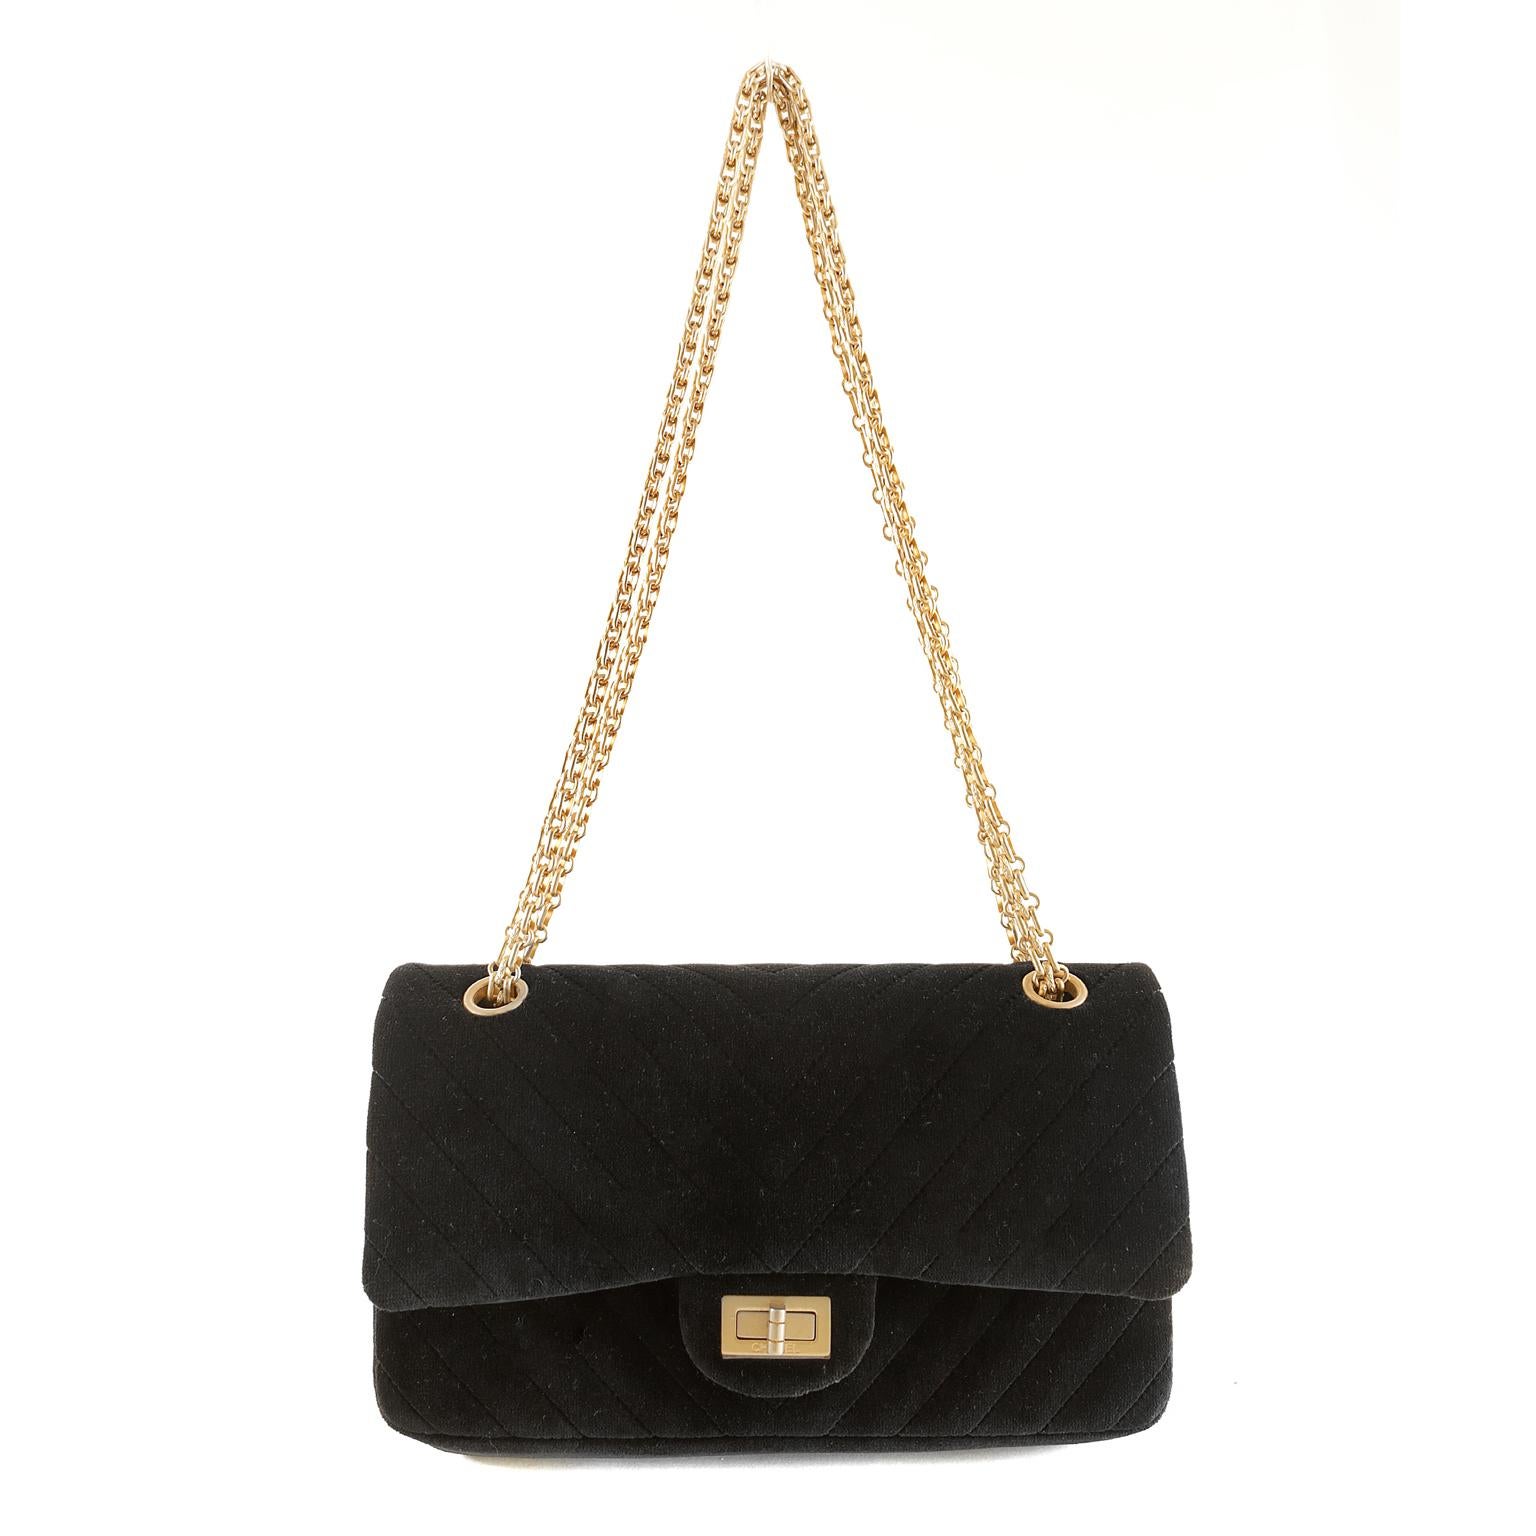 Chanel Black Velvet Chevron Reissue Bag-  pristine condition
Rich textures combined with matte gold hardware accents make this a collectible standout piece.  
Luxurious black velvet is quilted in chevron pattern.  Matte gold mademoiselle twist lock